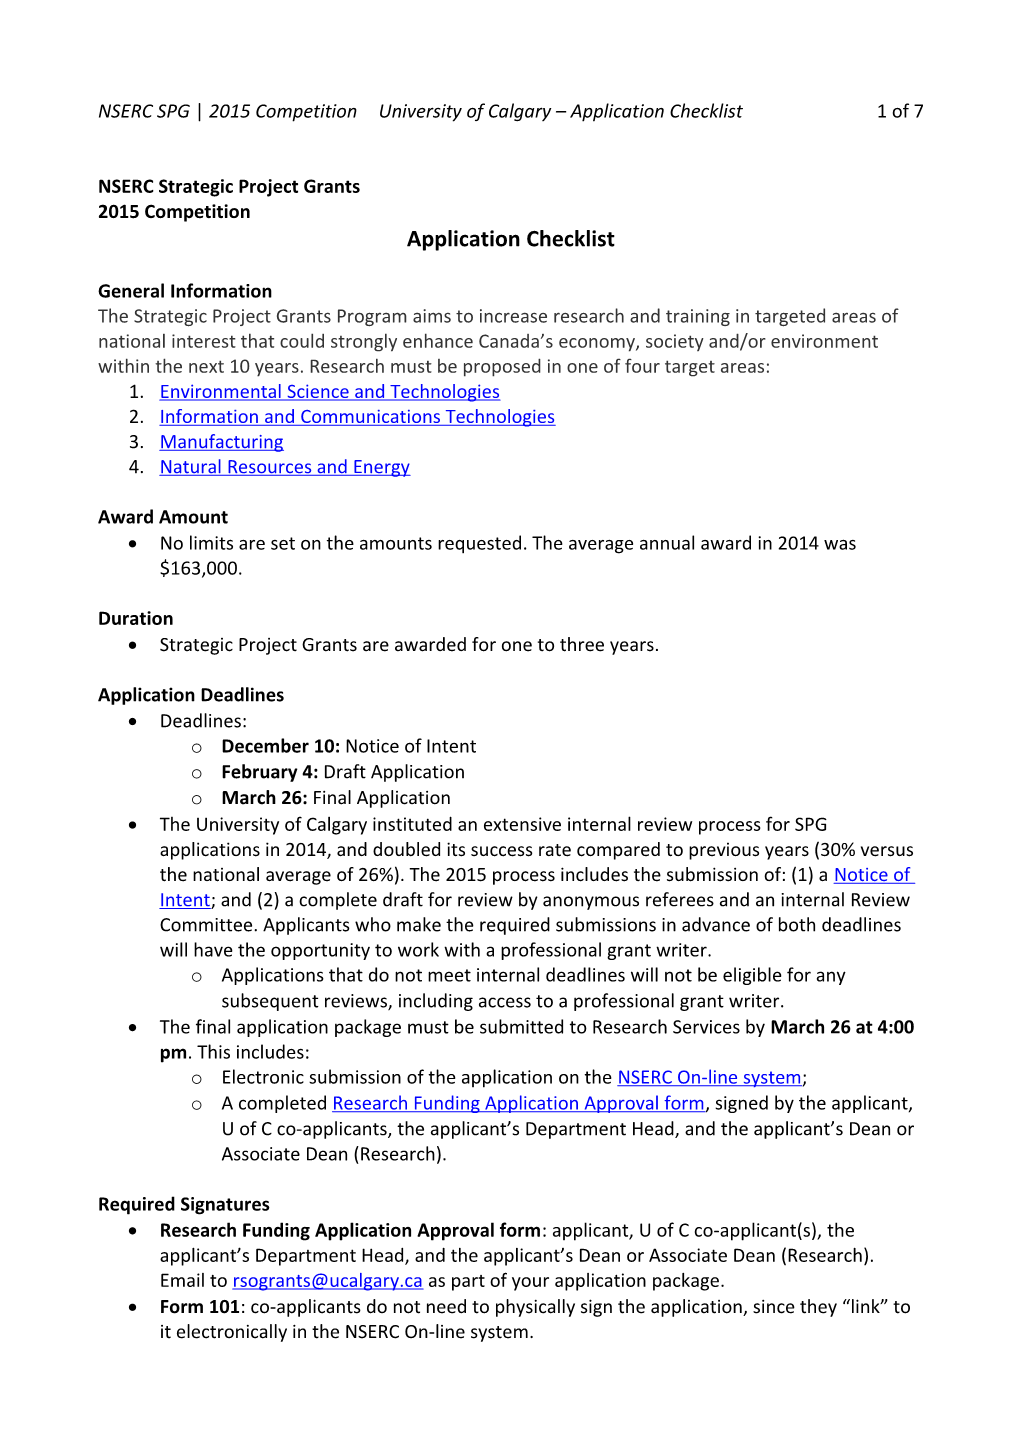 NSERC SPG 2015 Competition University of Calgary Application Checklist 7 of 7